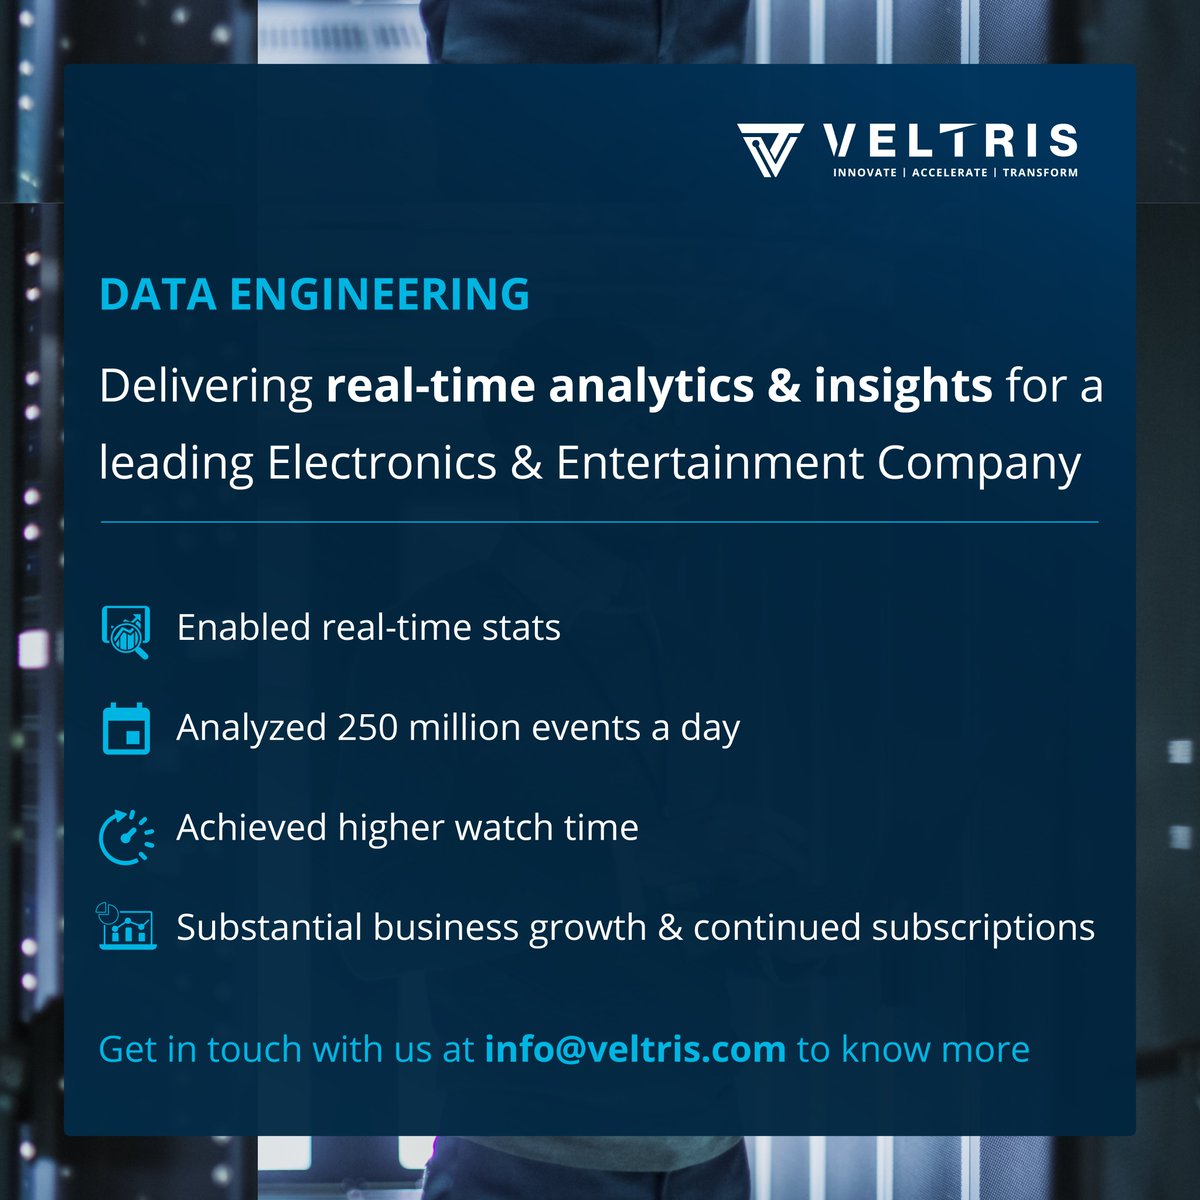 Take a look at what our customer achieved after implementing real-time analytics through our Data Engineering capabilities. Do you feel like you need help with something similar? tinyurl.com/sp9cpu8r 

#dataengineering #analystics #dataanalytics #realtimeanalytics